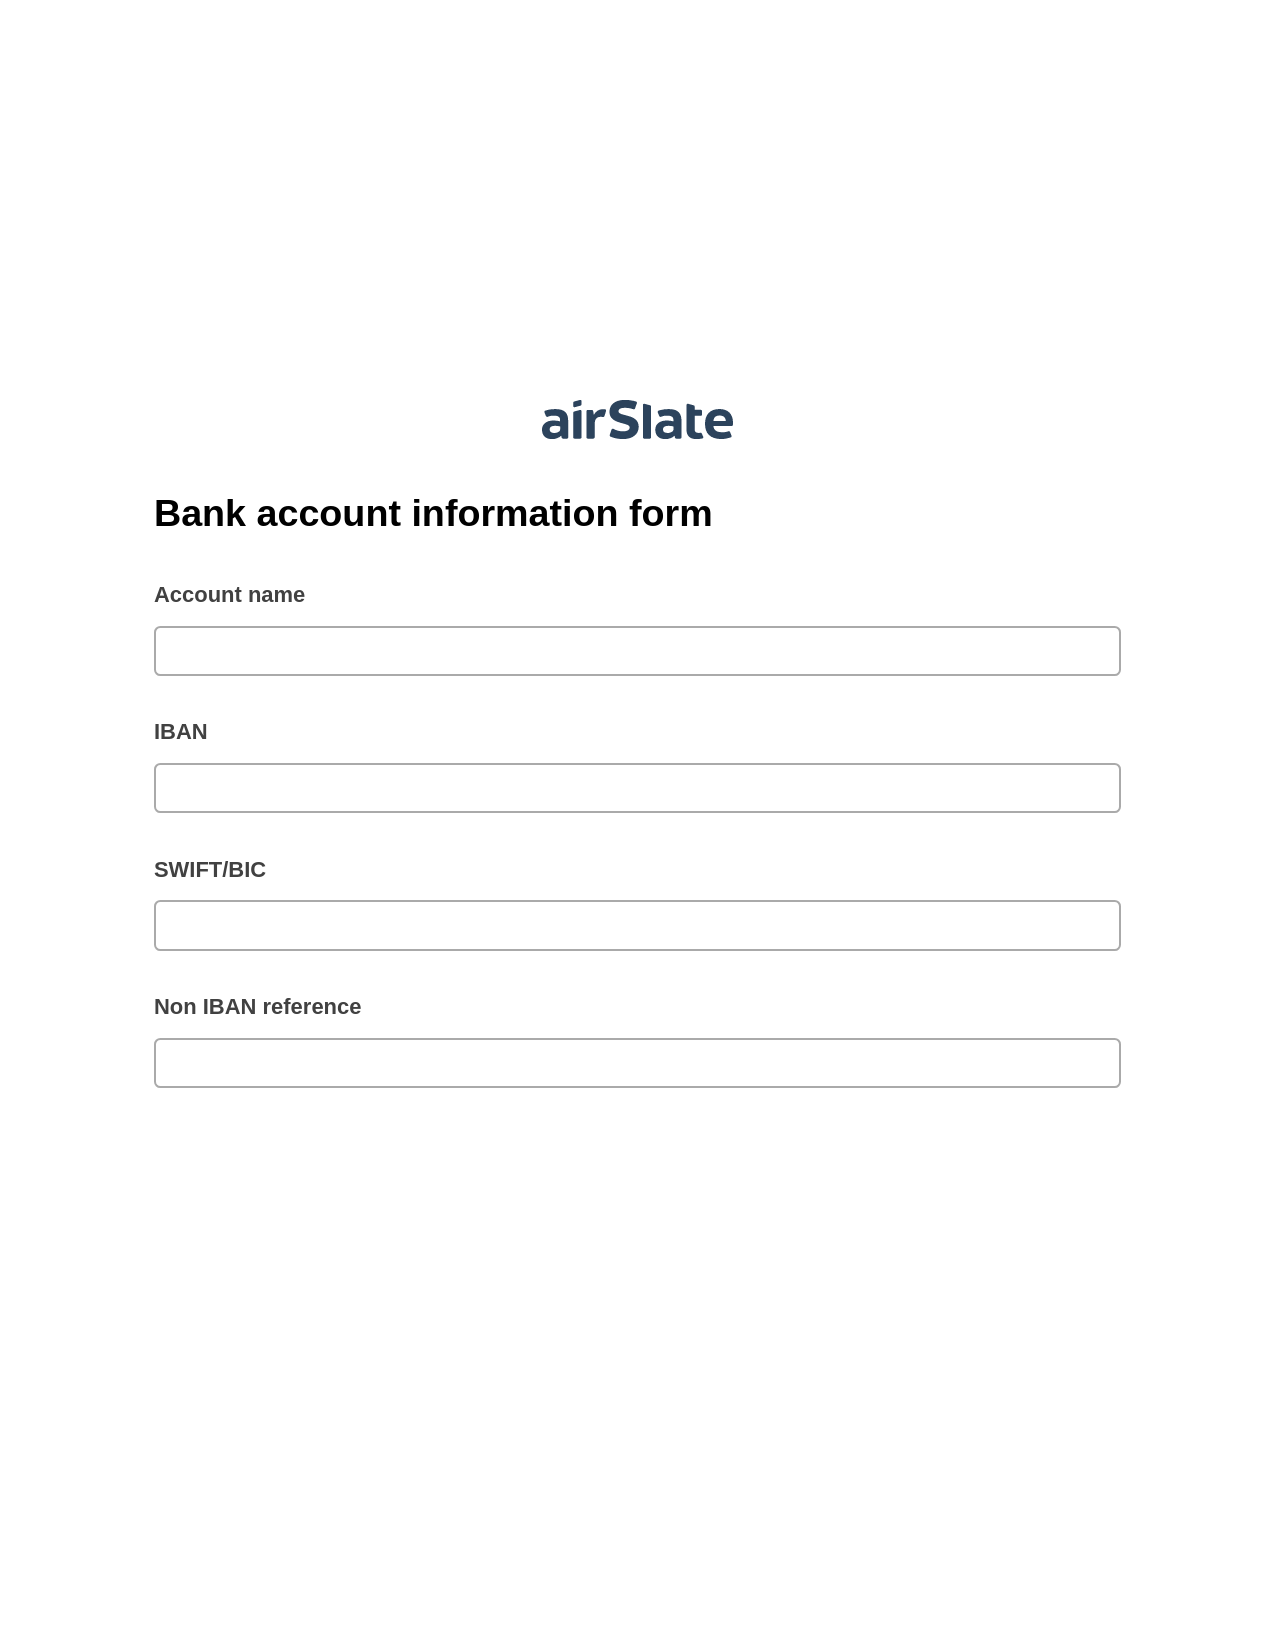 Bank account information form Pre-fill from Google Sheet Dropdown Options Bot, Mailchimp add recipient to audience Bot, Export to Google Sheet Bot